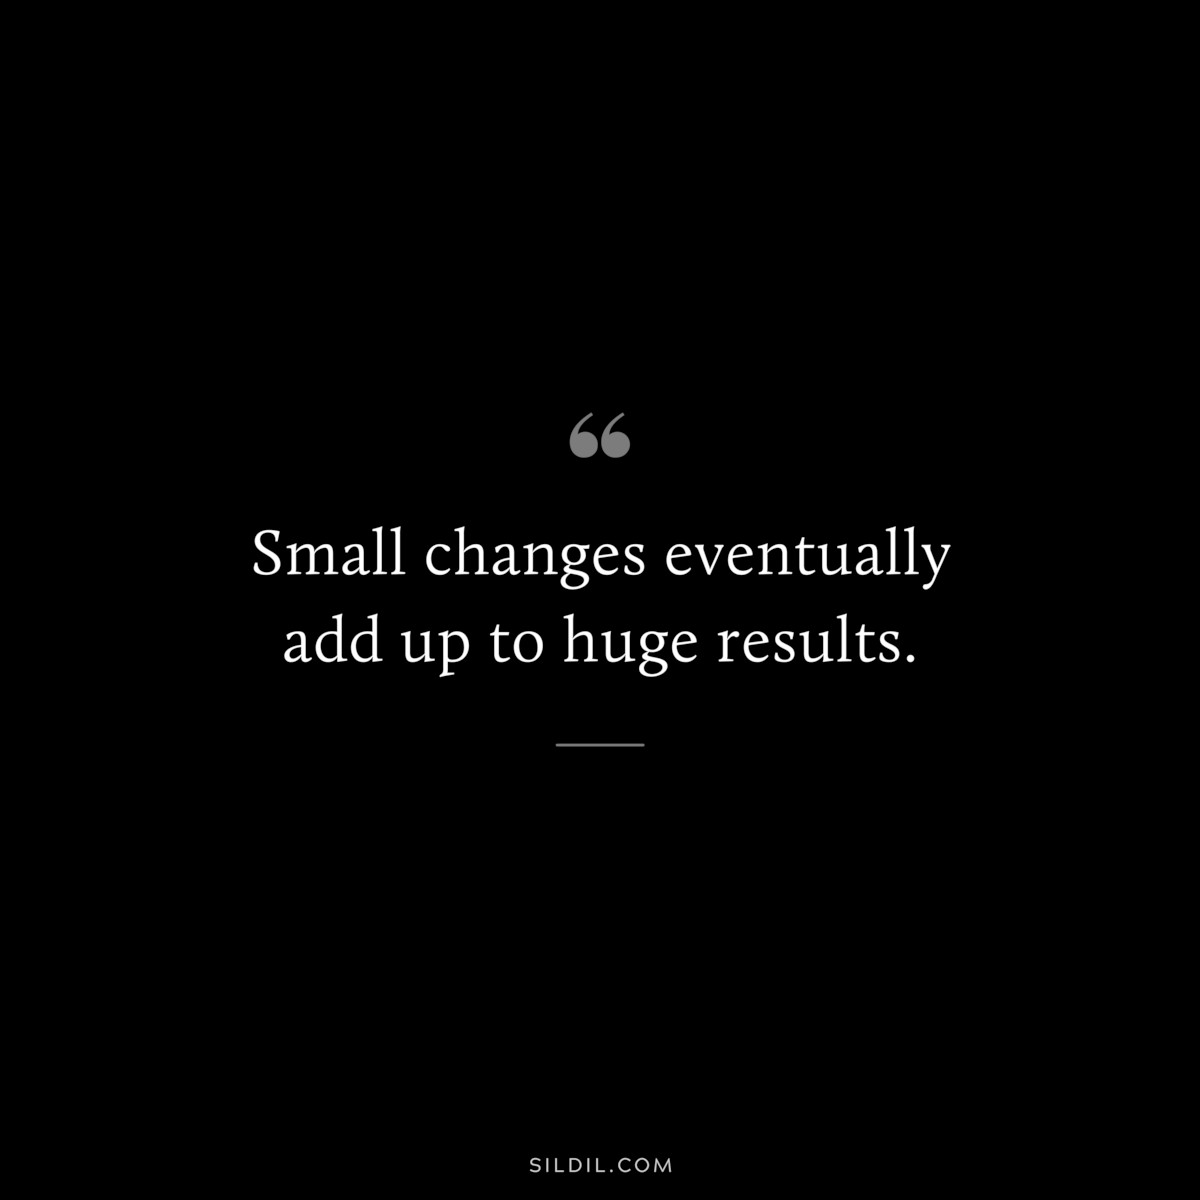 Small changes eventually add up to huge results.